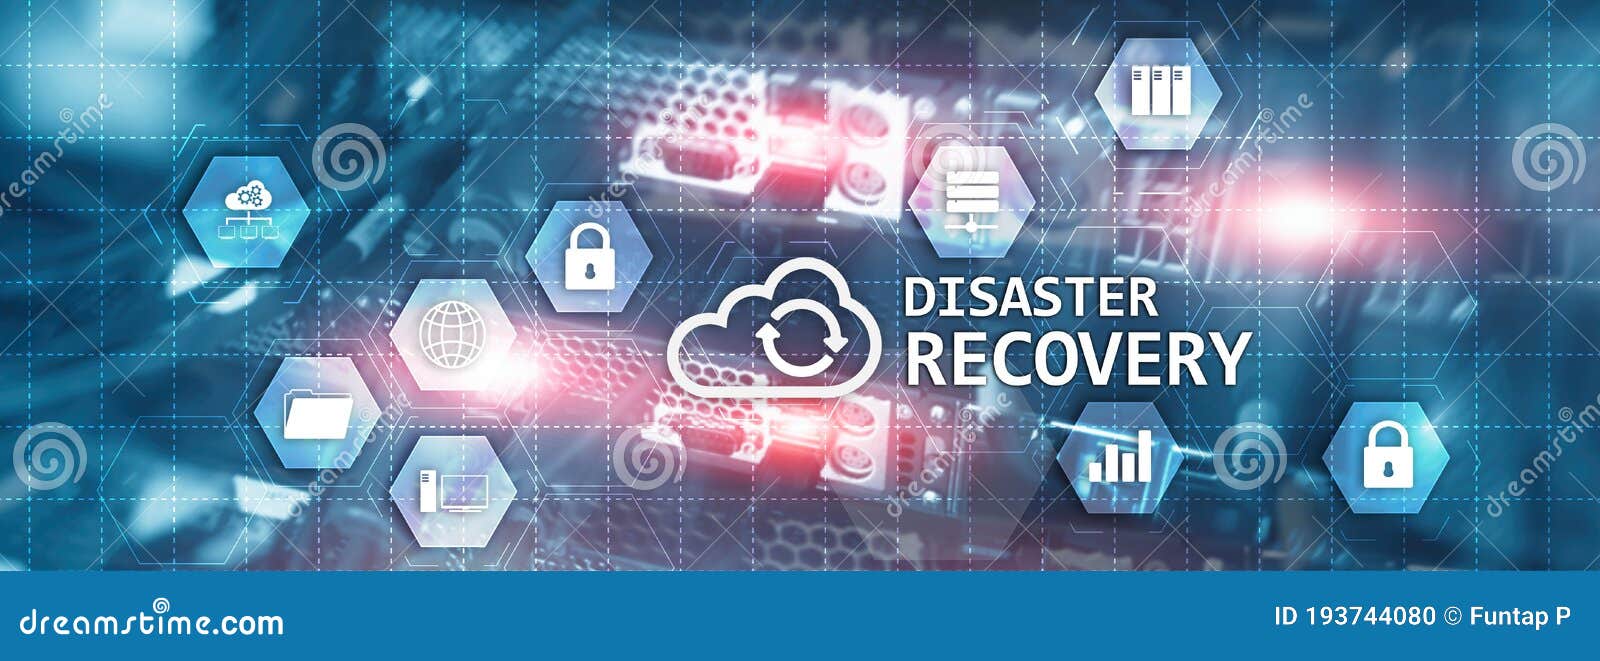 what is a disaster recovery plan in information technology